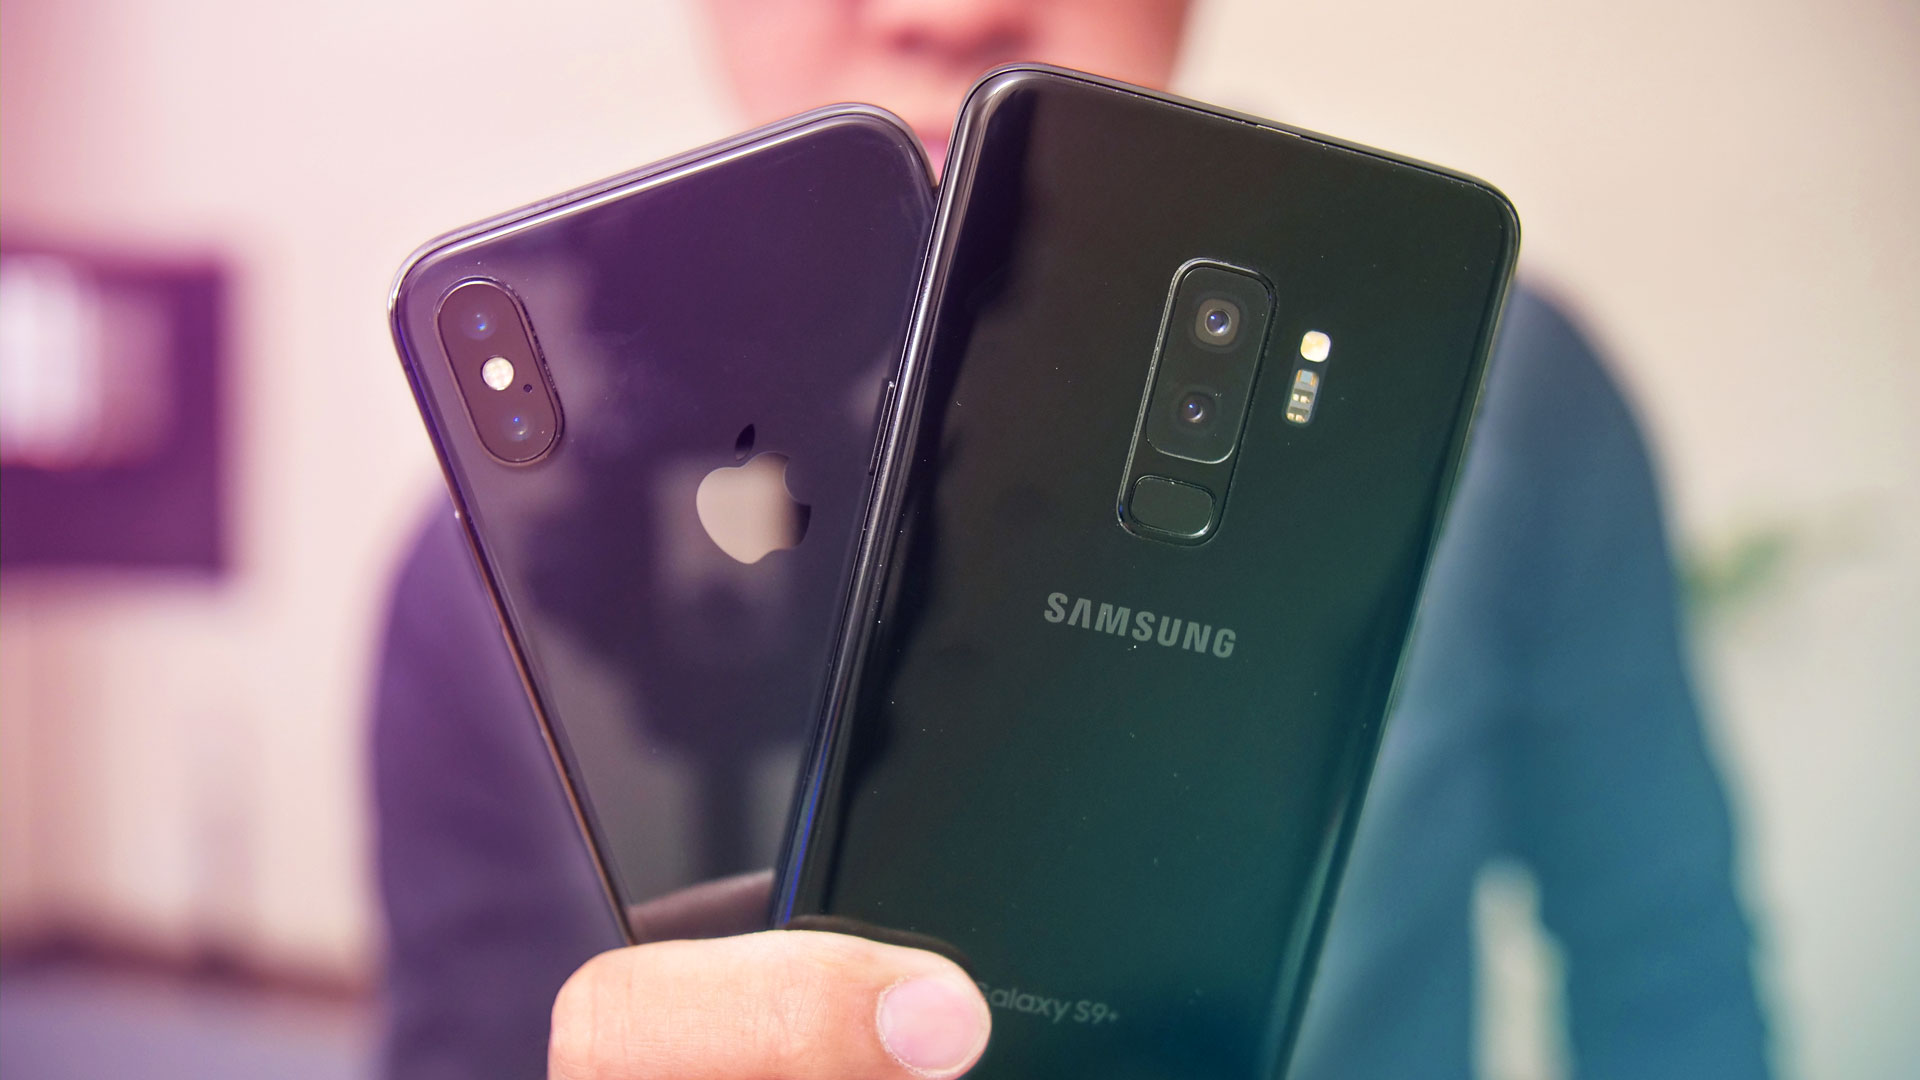 Samsung Galaxy S9 and S9 Plus review: Excellent, not monumental